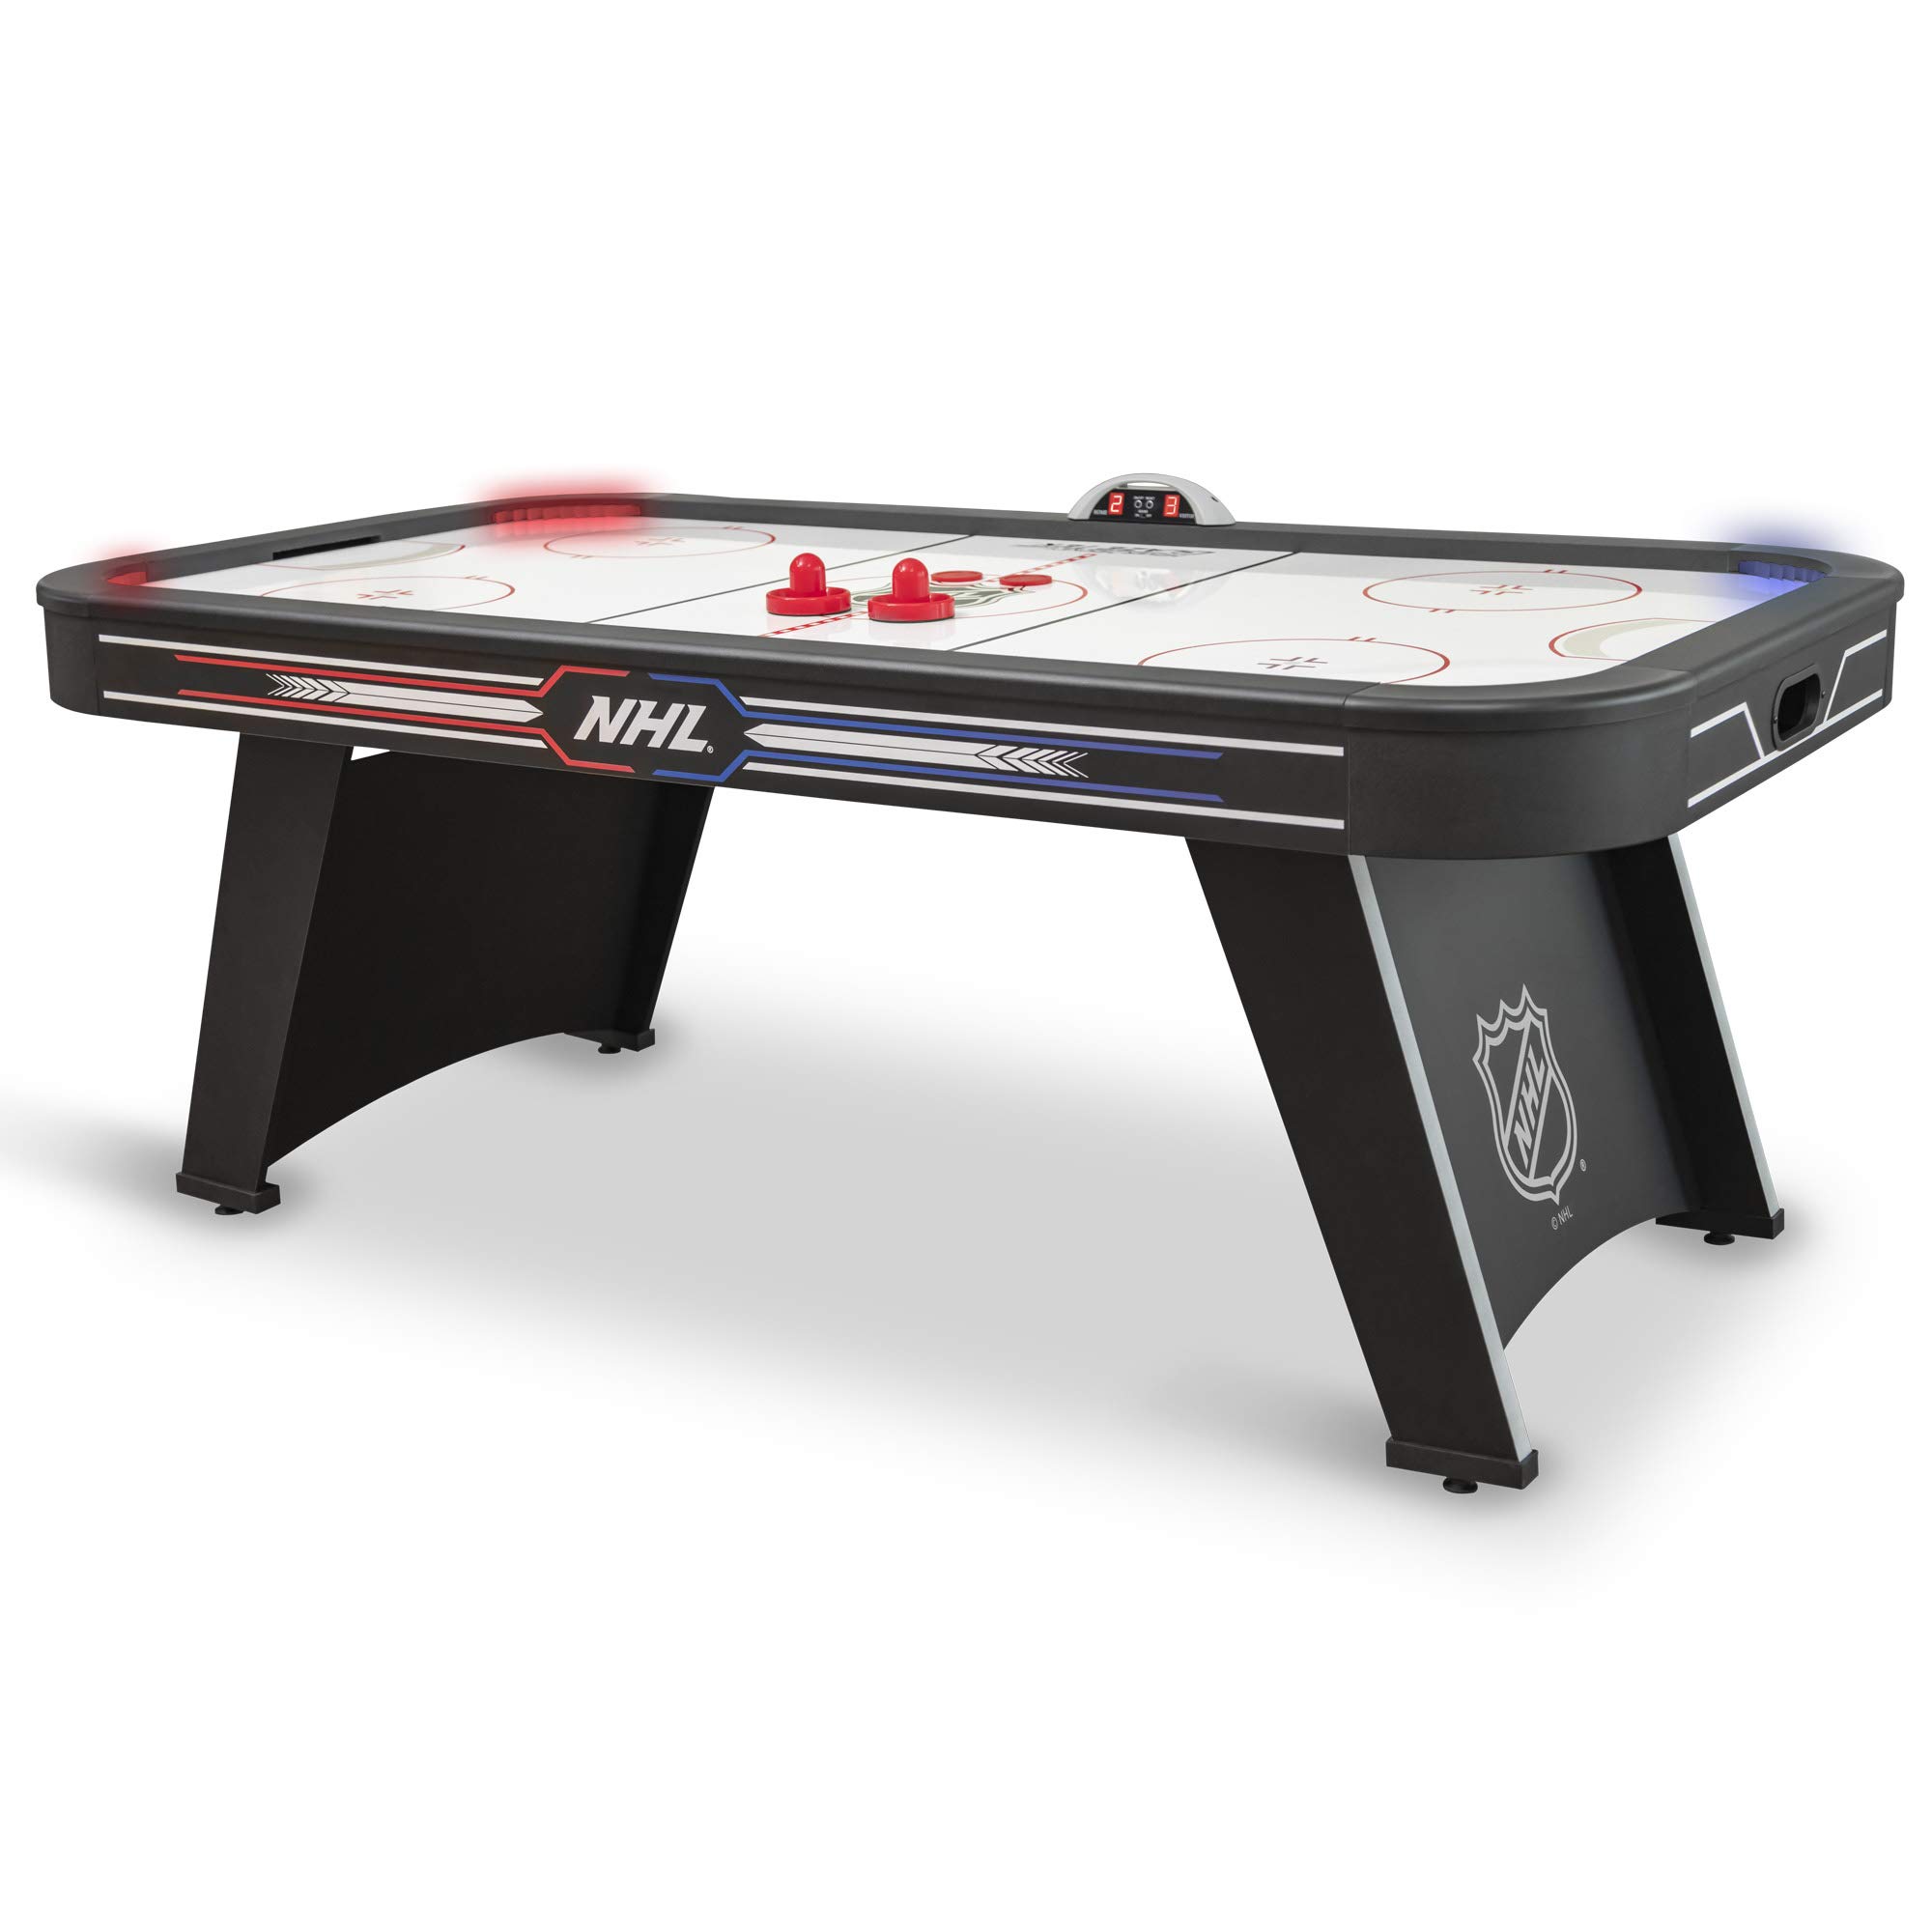 Eastpoint Sports Nhl Air Hockey Game Tables By Eastpoint Sports - 80 Air Powered Hockey Tables With Interactive Lights Stadium Sounds And Automat